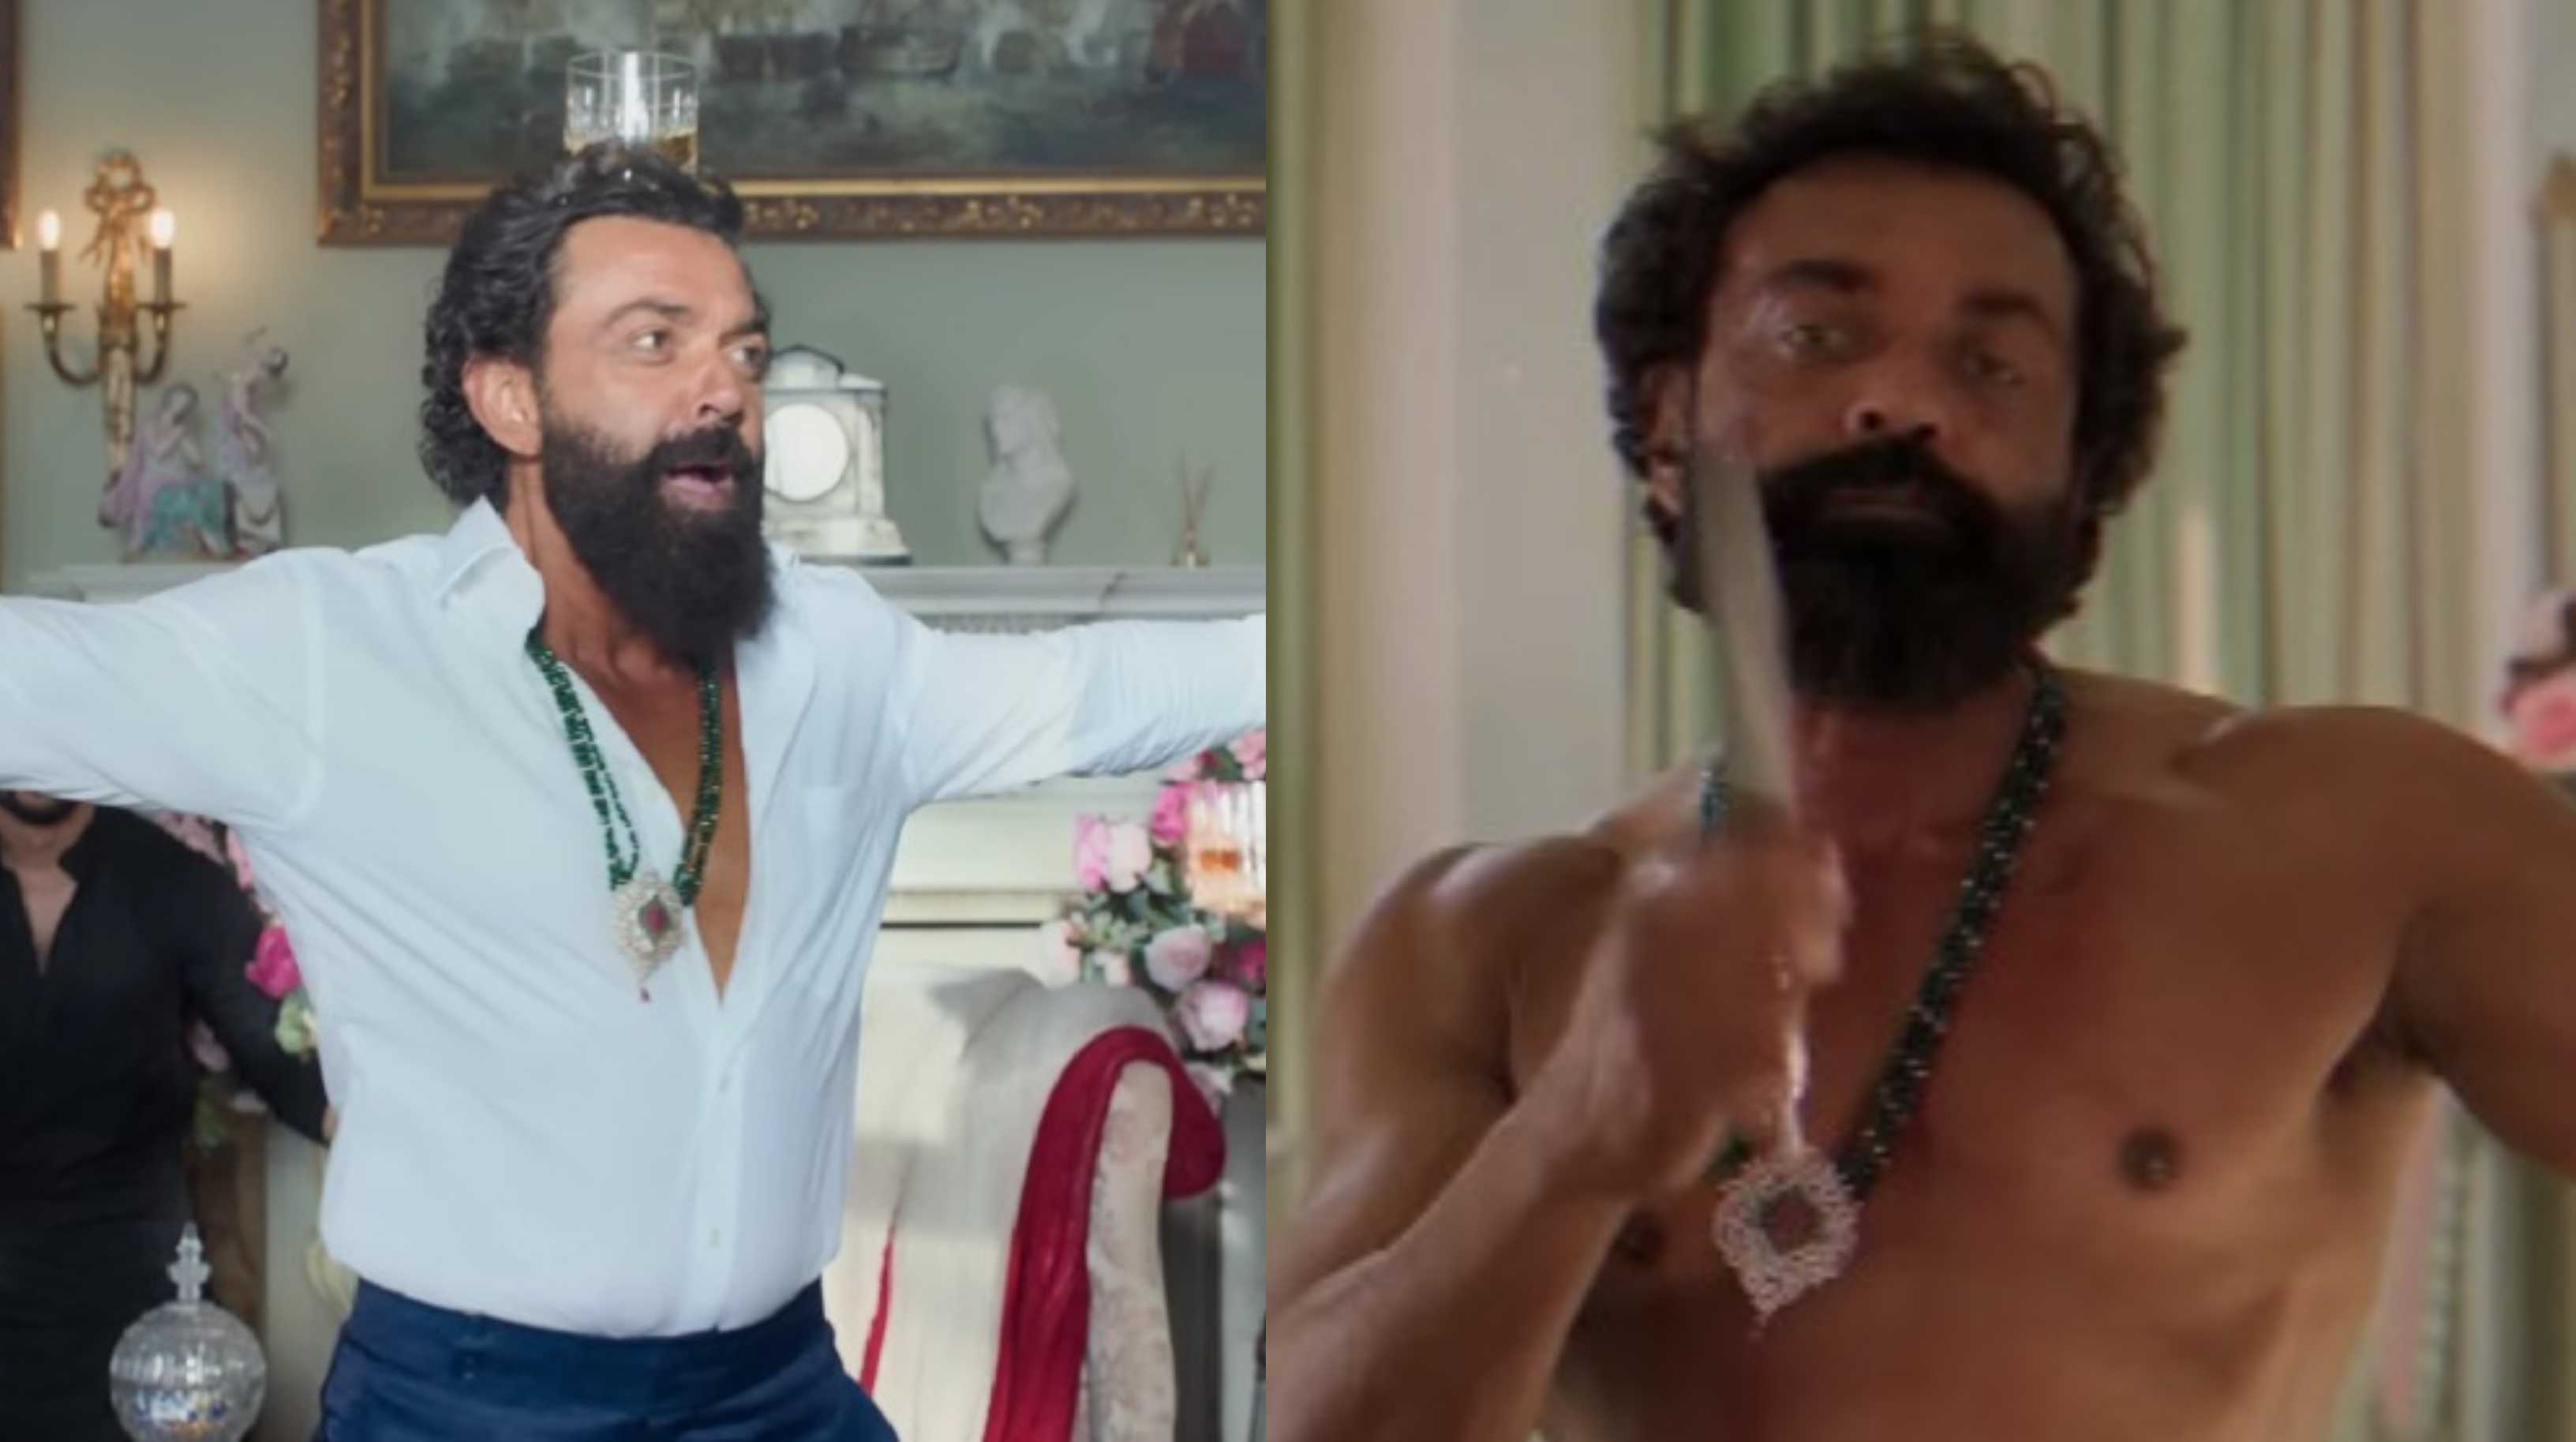 Animal: Bobby Deol reveals one dialogue he would have if Abrar could talk and no, it's not for Ranbir Kapoor